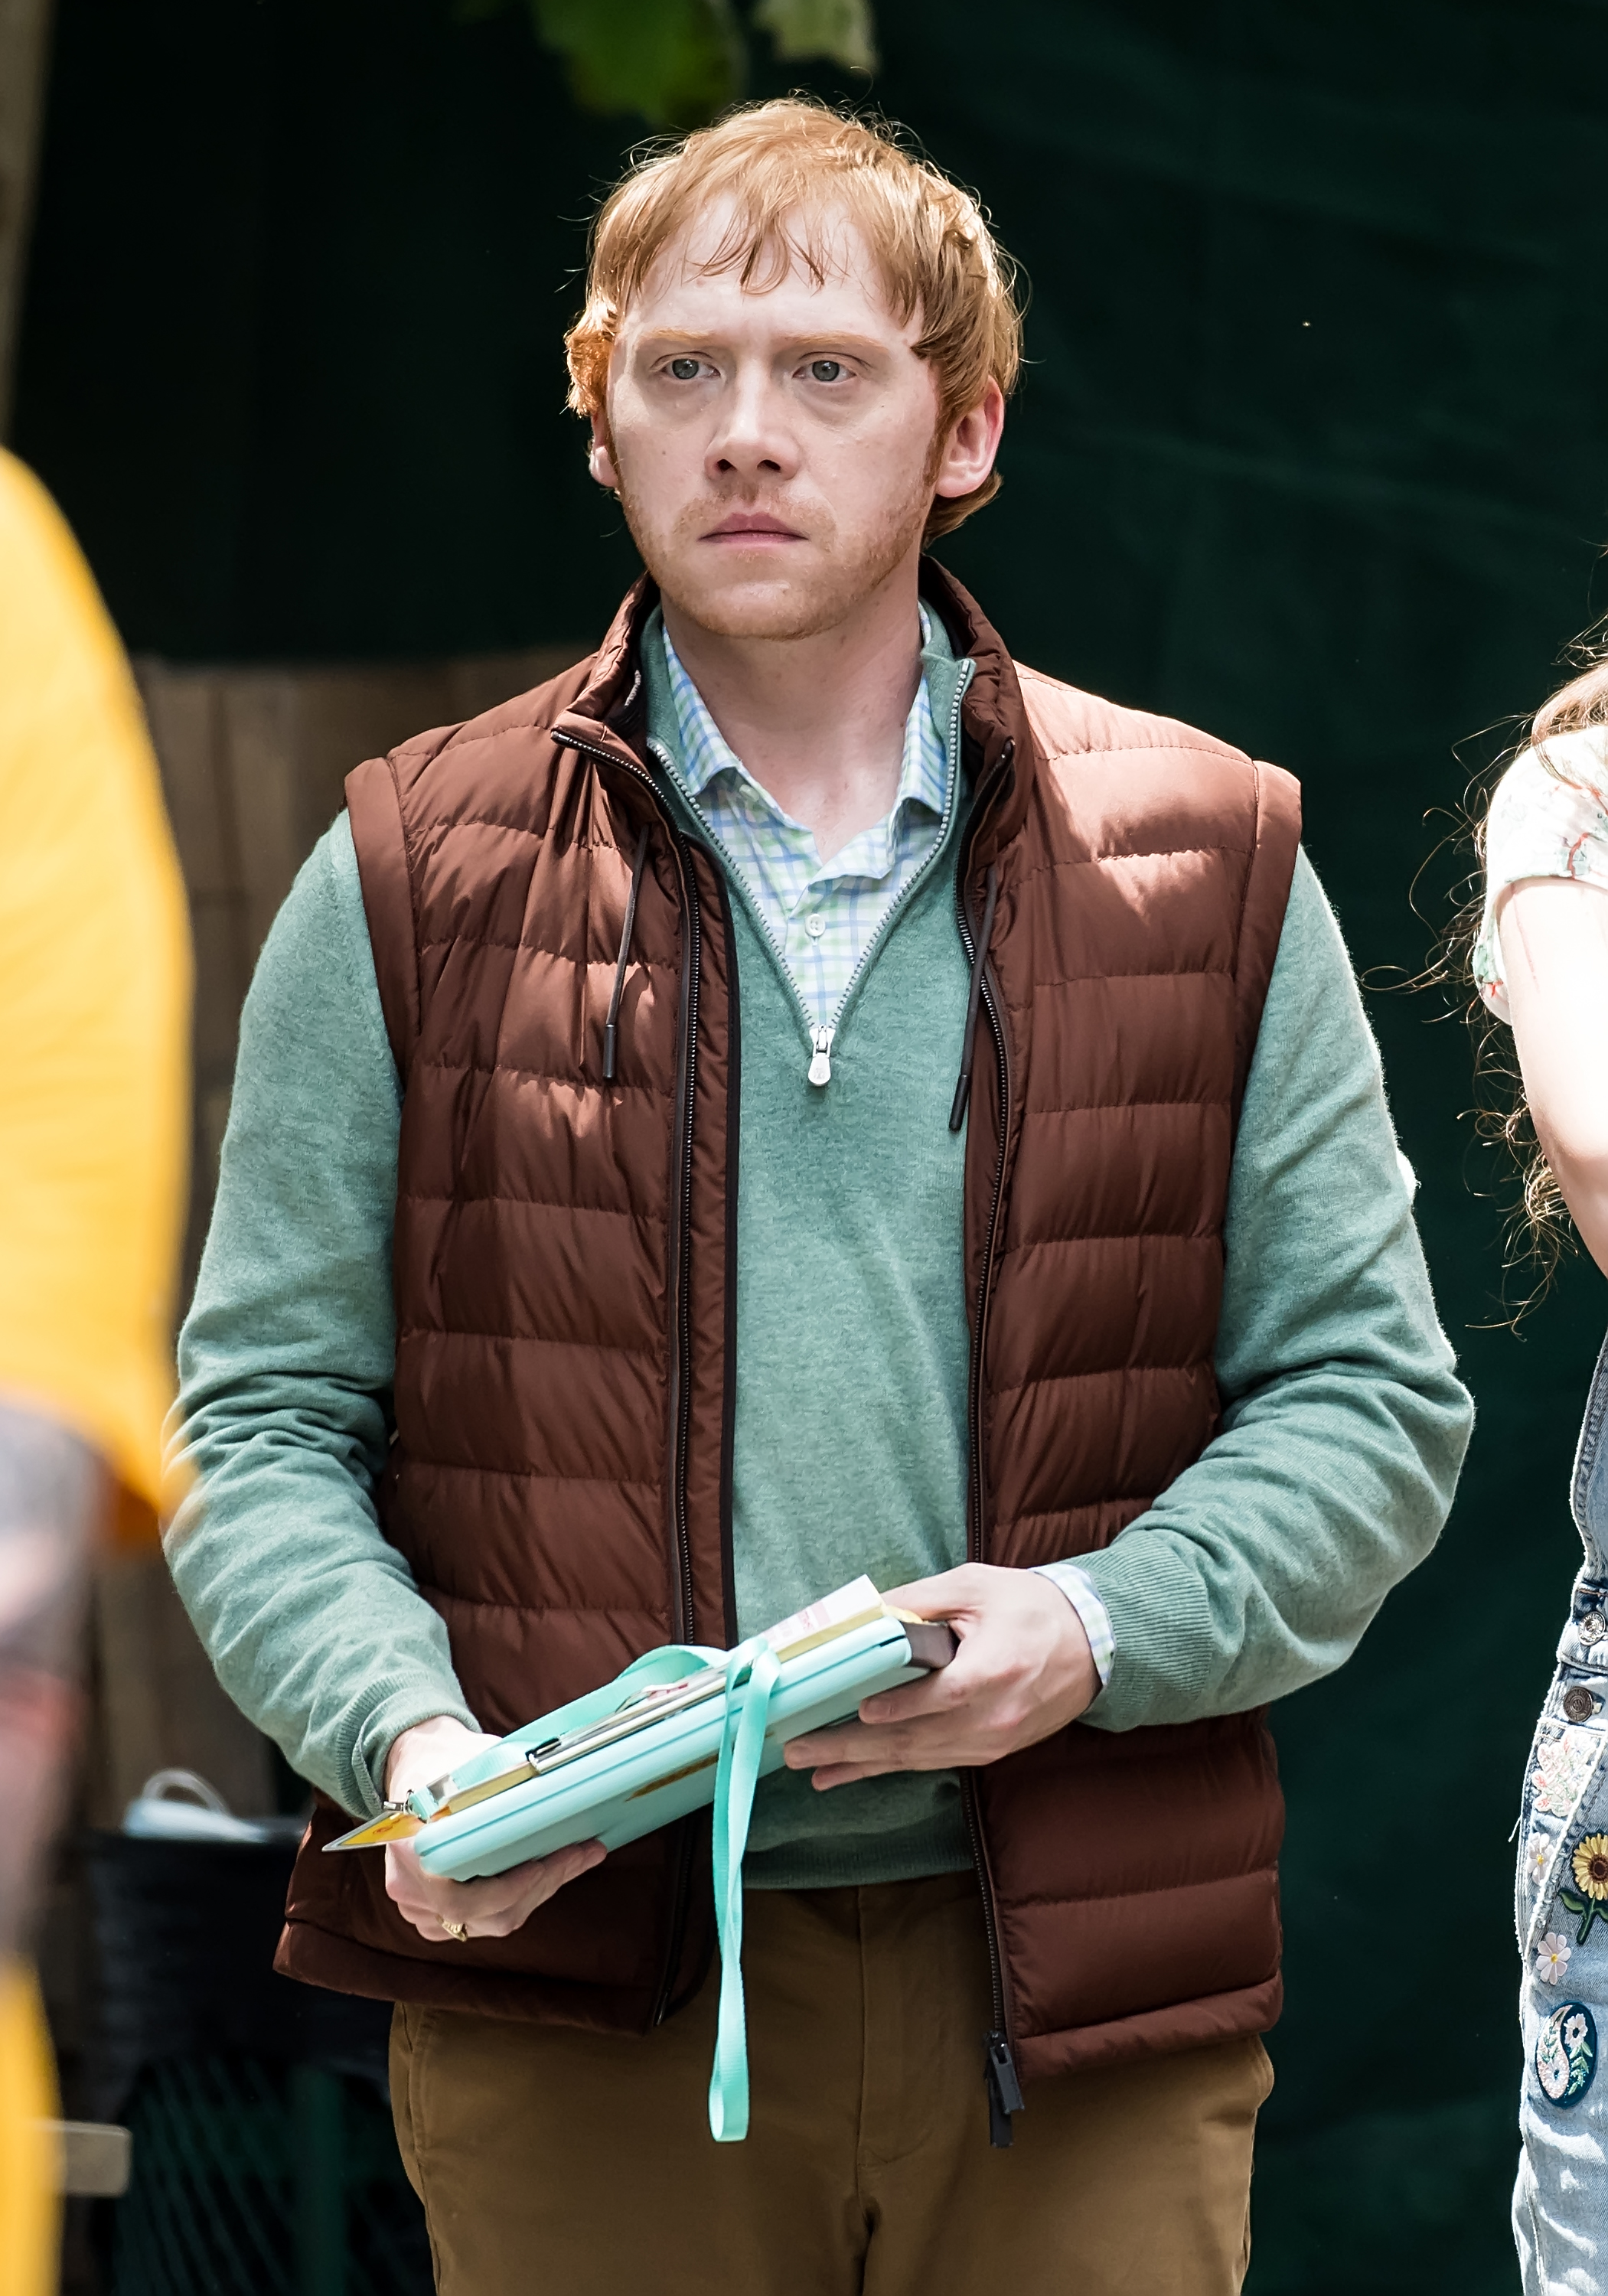 Rupert Grint while filming "Servant" in Philadelphia, Pennsylvania on June 9, 2021 | Source: Getty Images